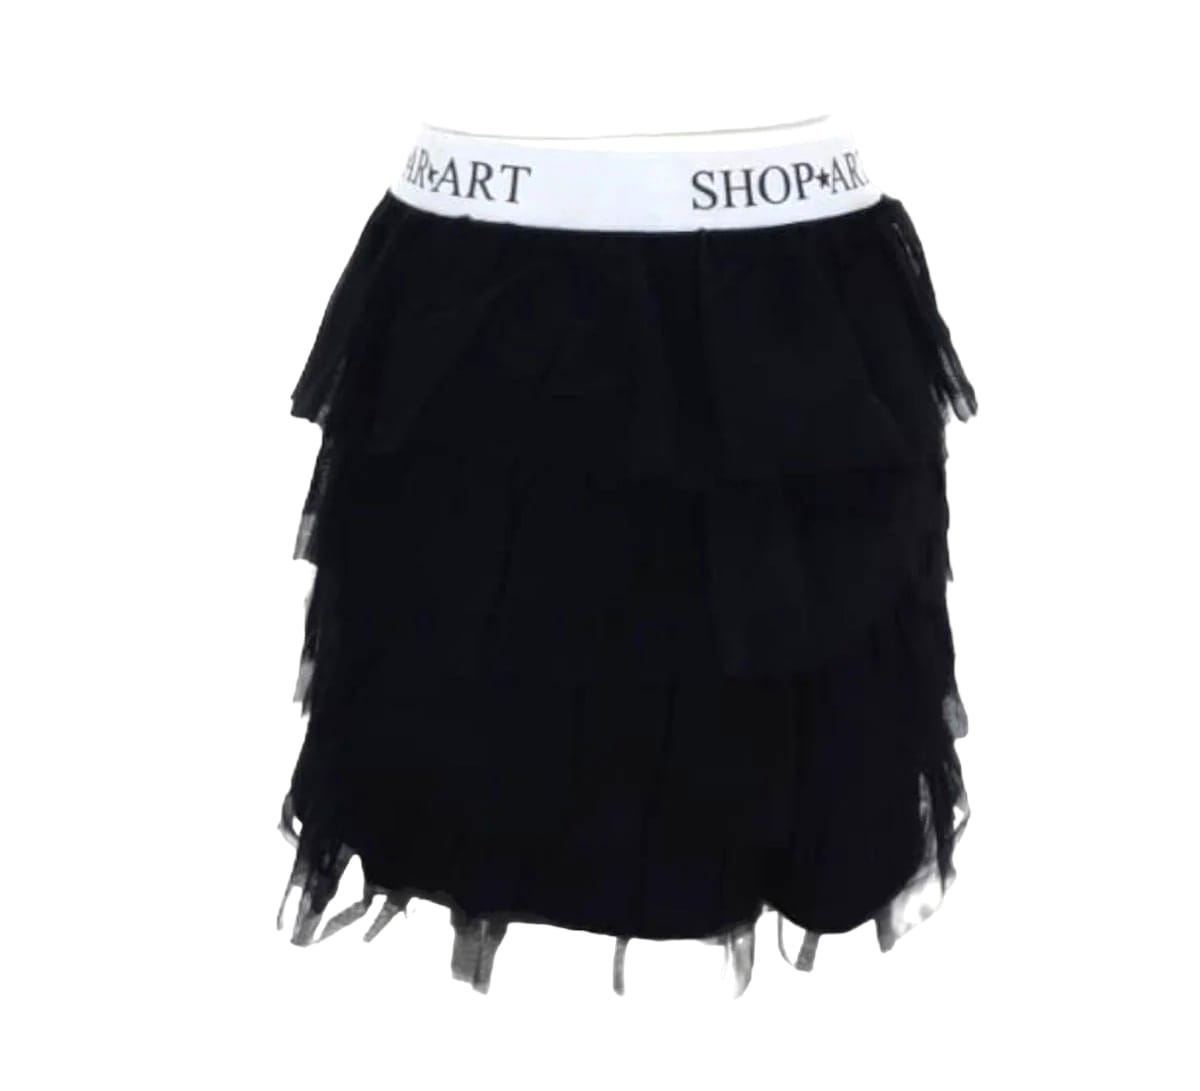 Shop Art Gonna in Tulle Donna